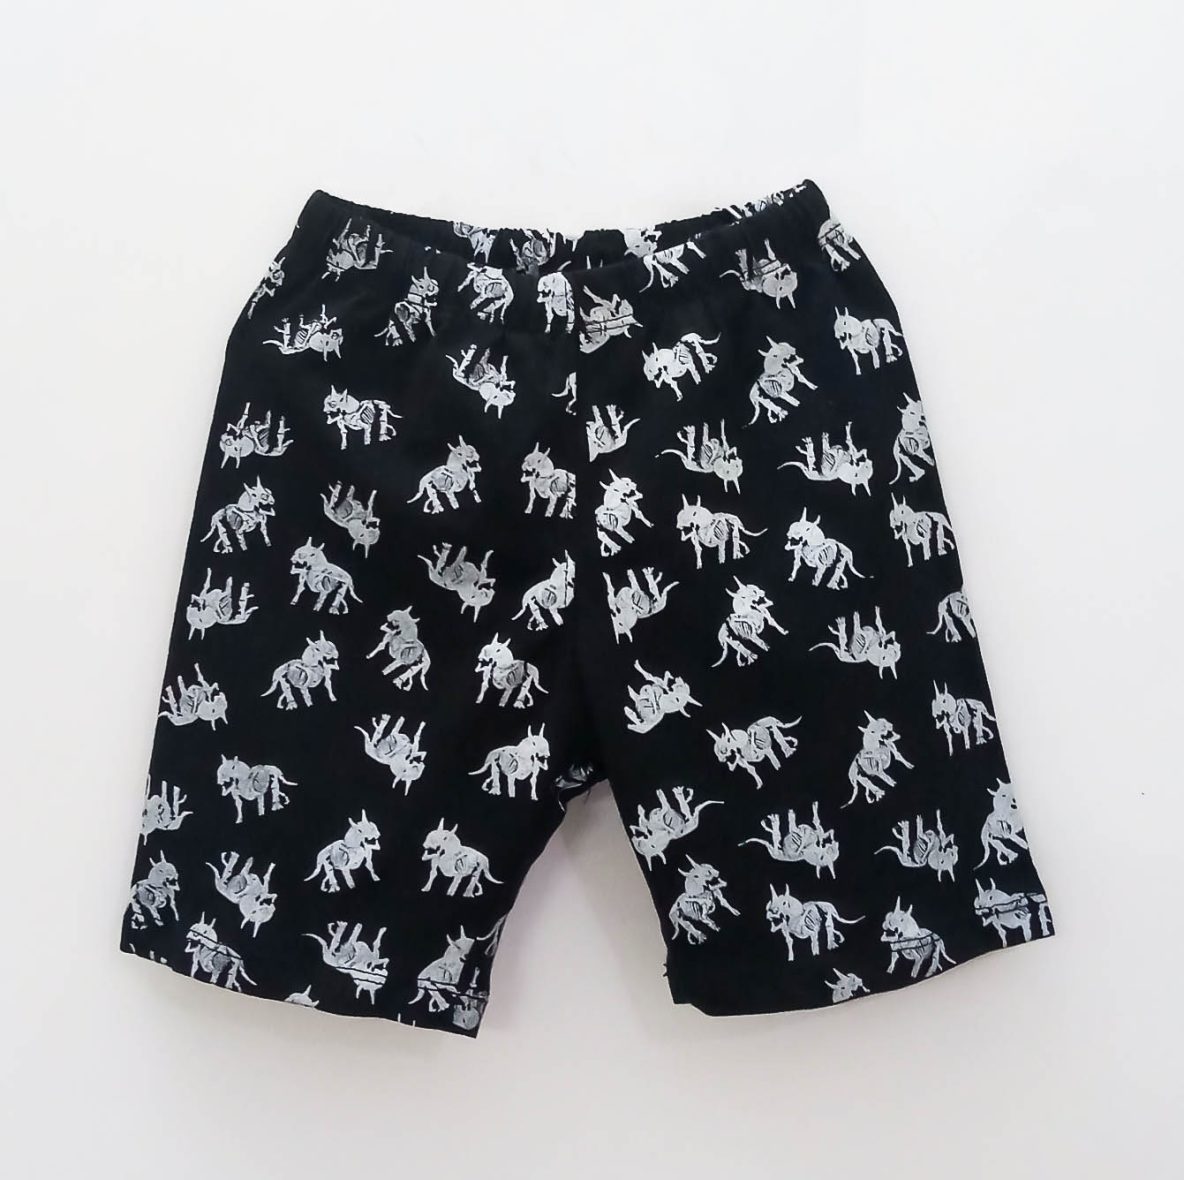 triceratops shorts